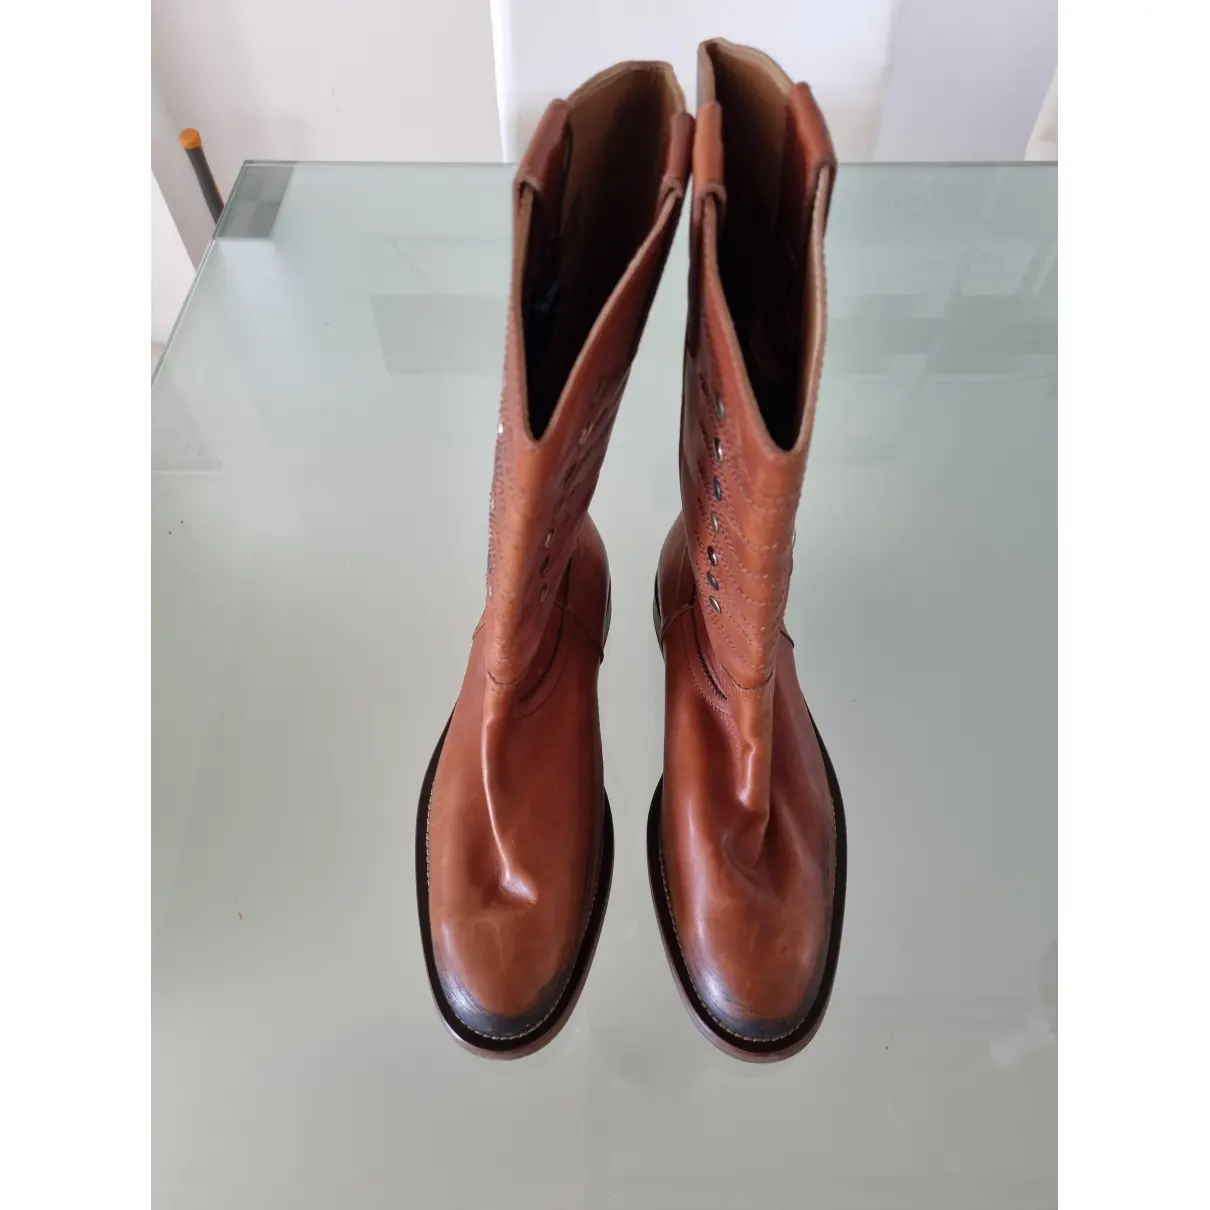 Buy D&G Leather boots online